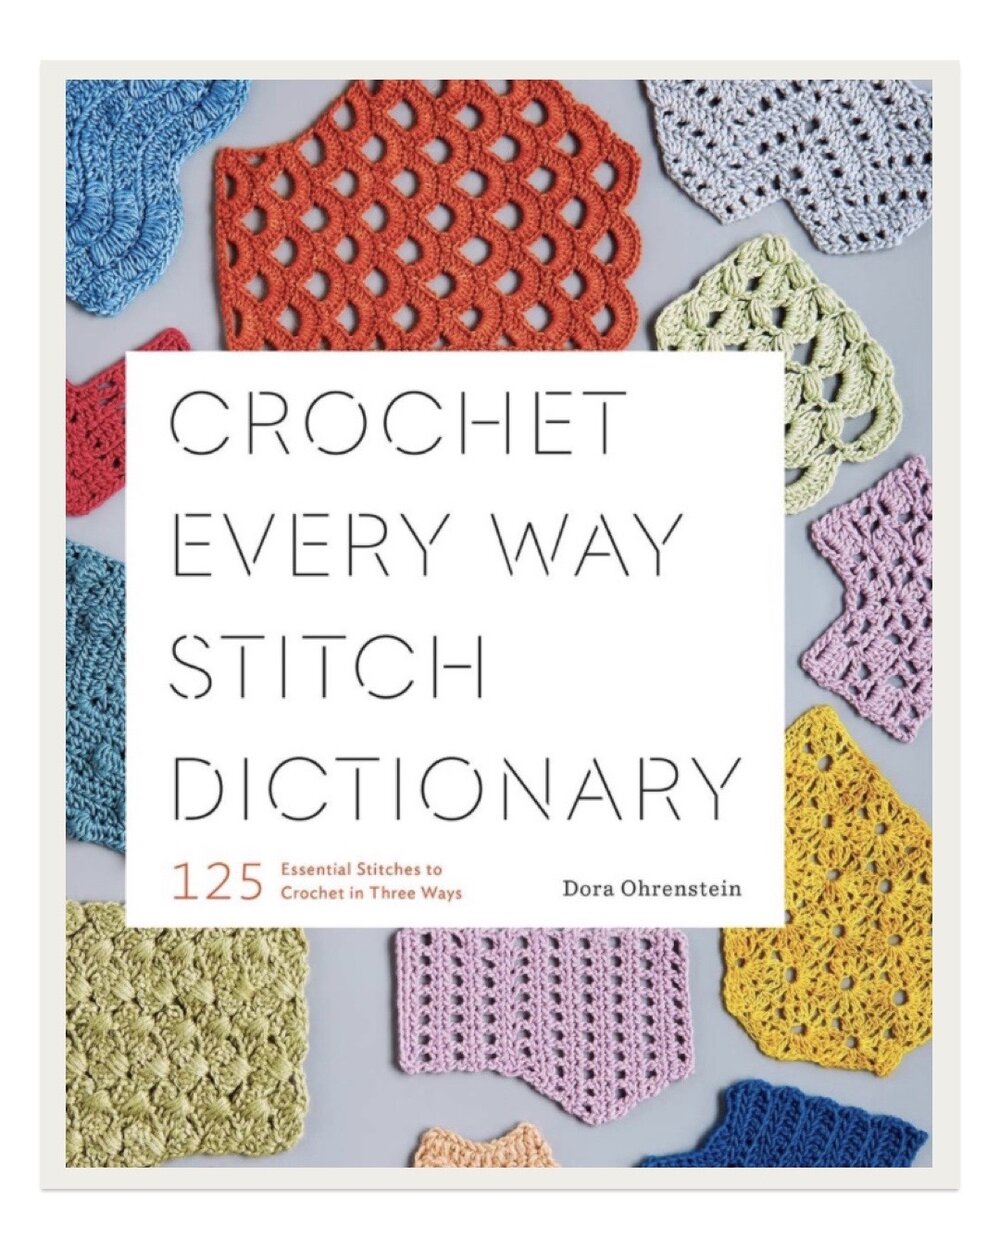 One of my more recent purchases, this book has totally advanced my crochet skills in such a short time! It’s filled with a plethora of different crochet stitches and textures, but the best part is that each stitch also contains instructions on how to increase and decrease in that stitch! This is one of the most essential books I’ve seen for anyone looking to up their crochet game.